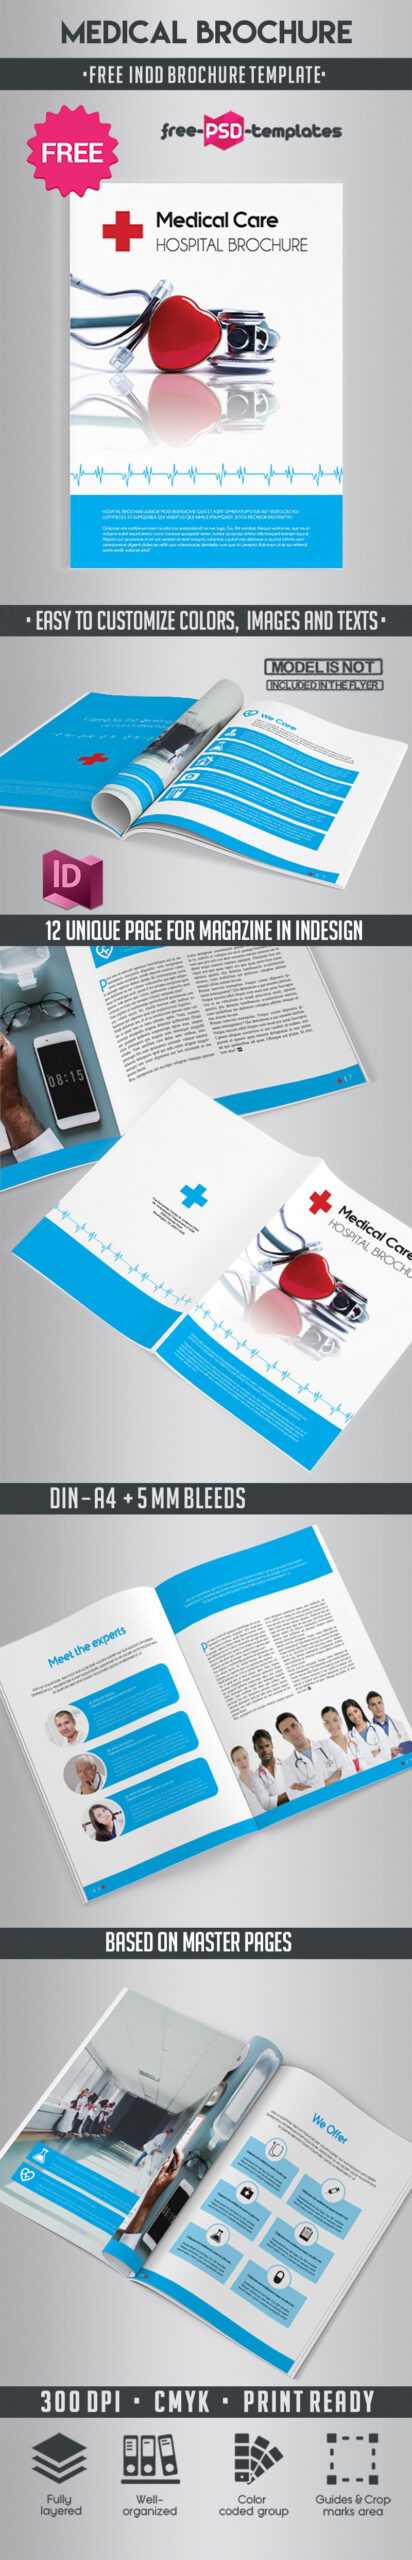 Free Medical Brochure Indd Template | Free Psd Templates With Regard To Brochure Template Indesign Free Download